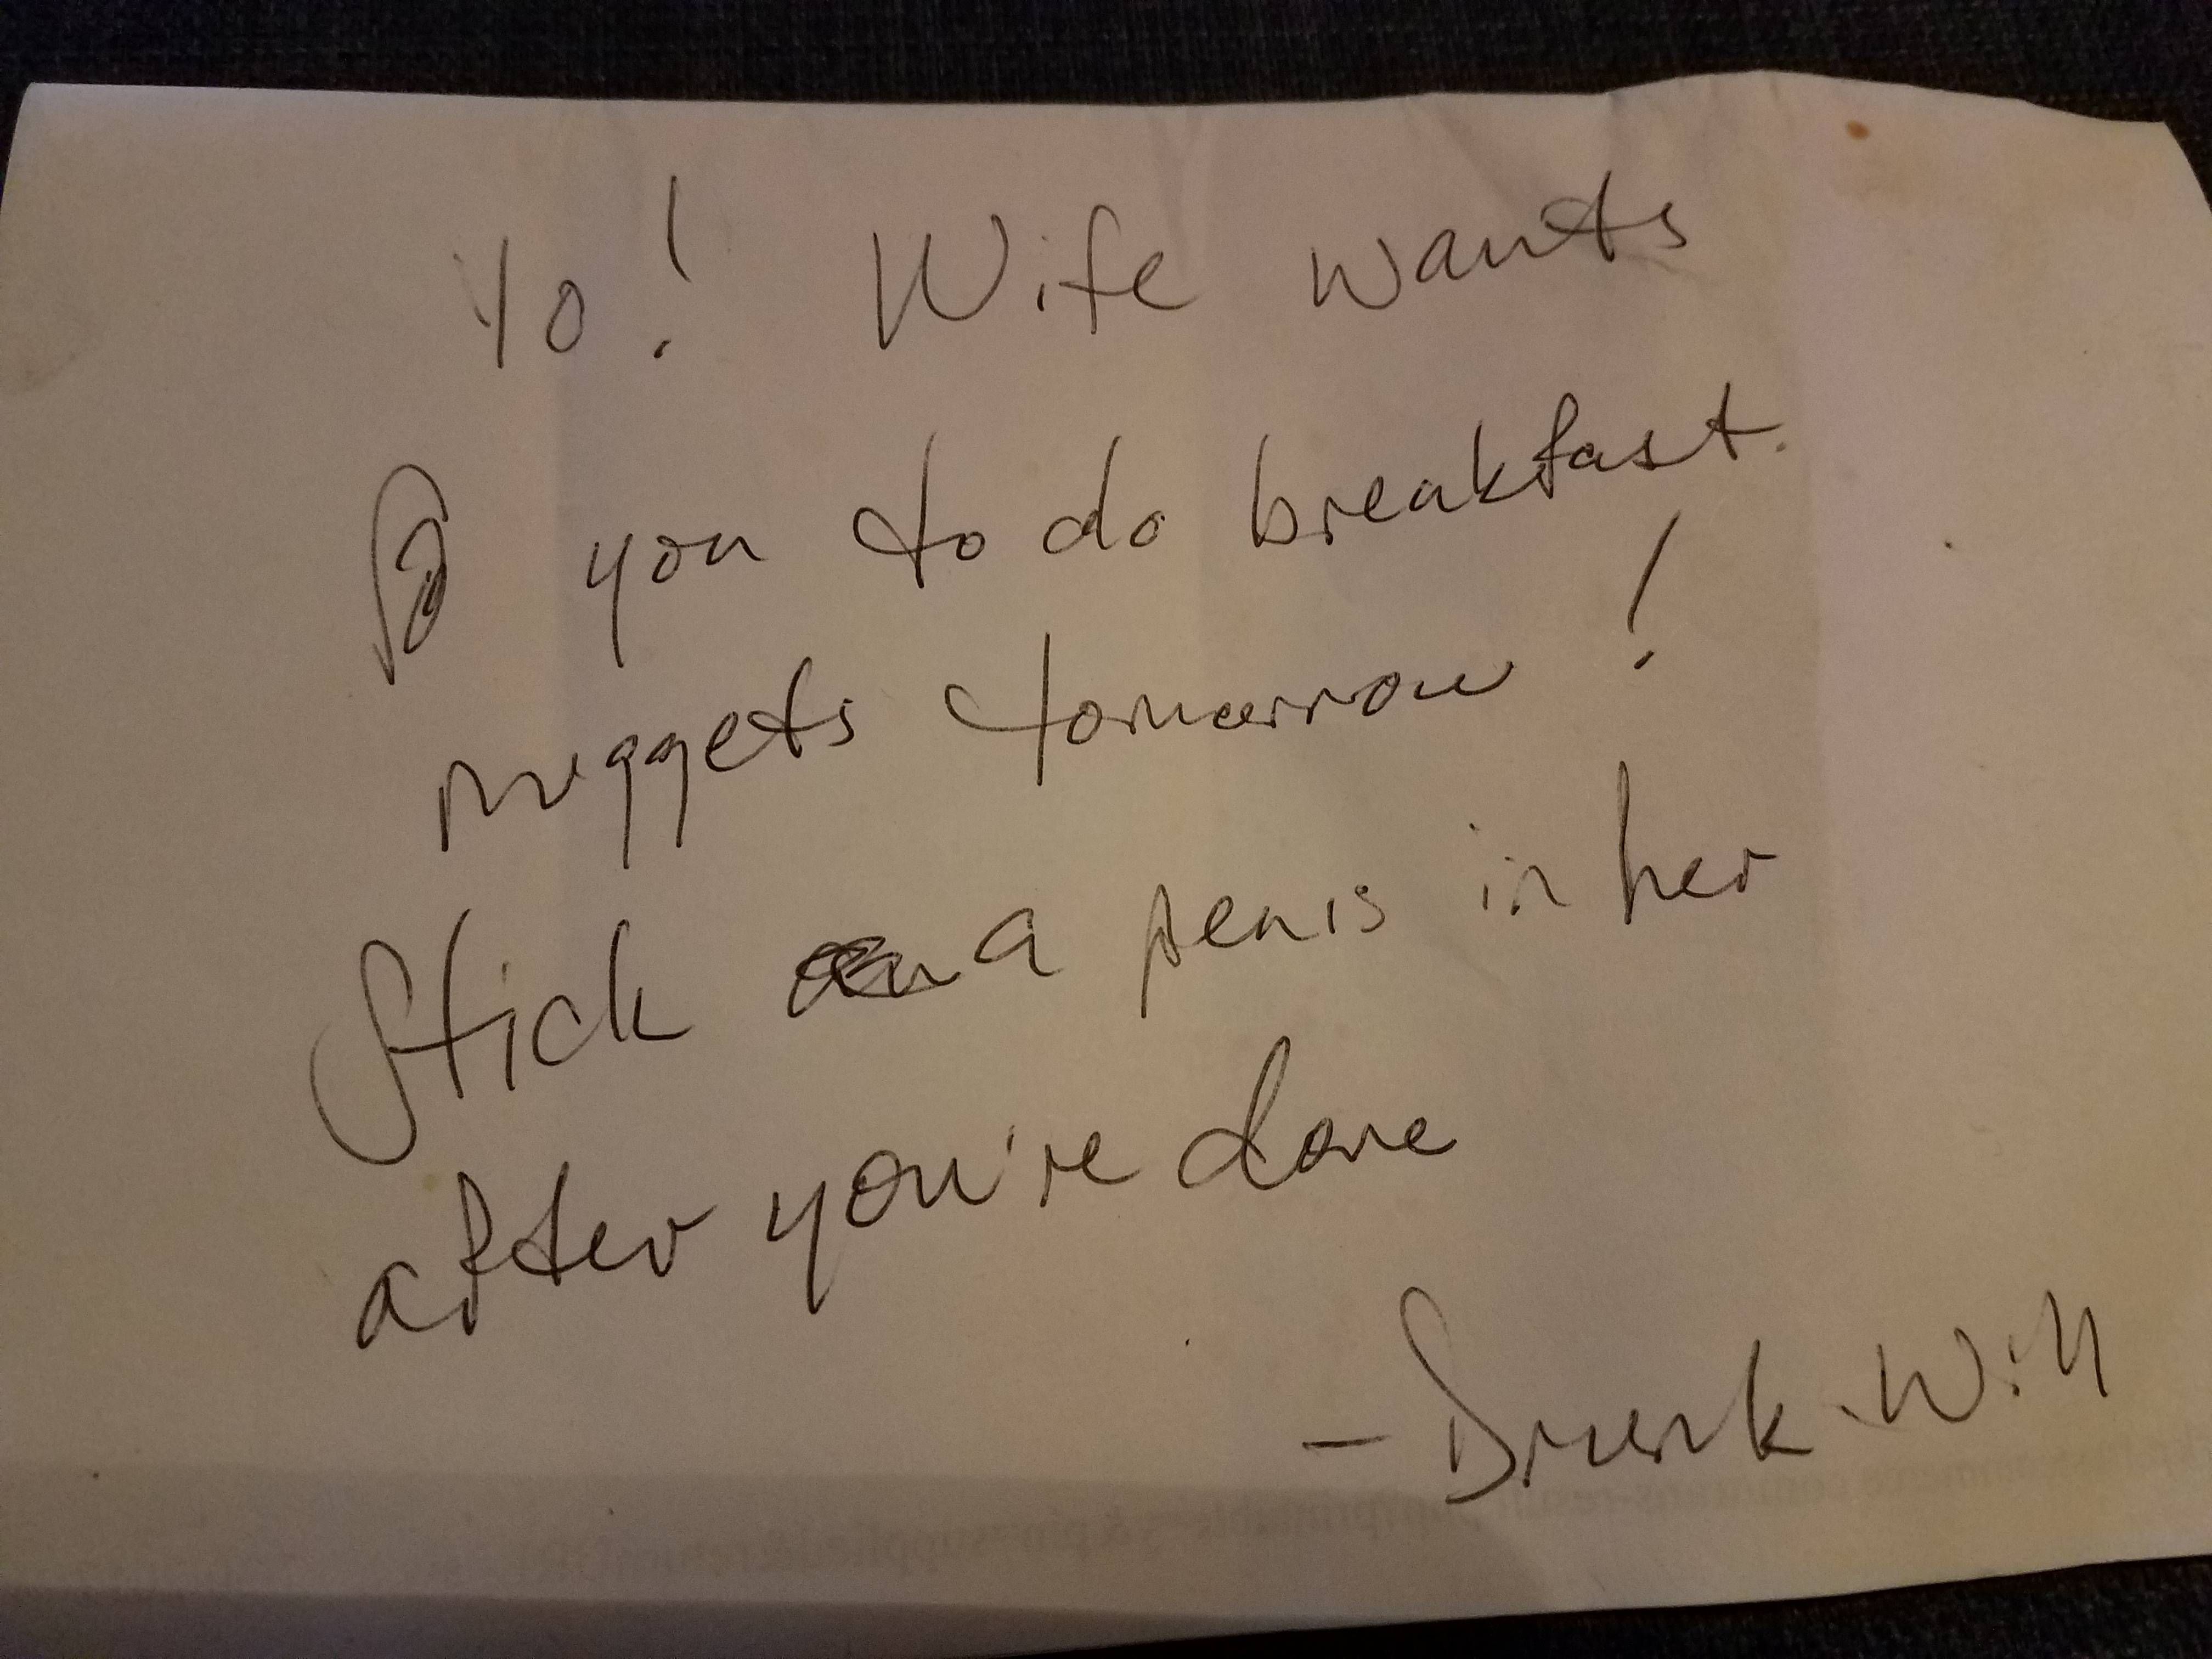 My husband's drunk letter to himself